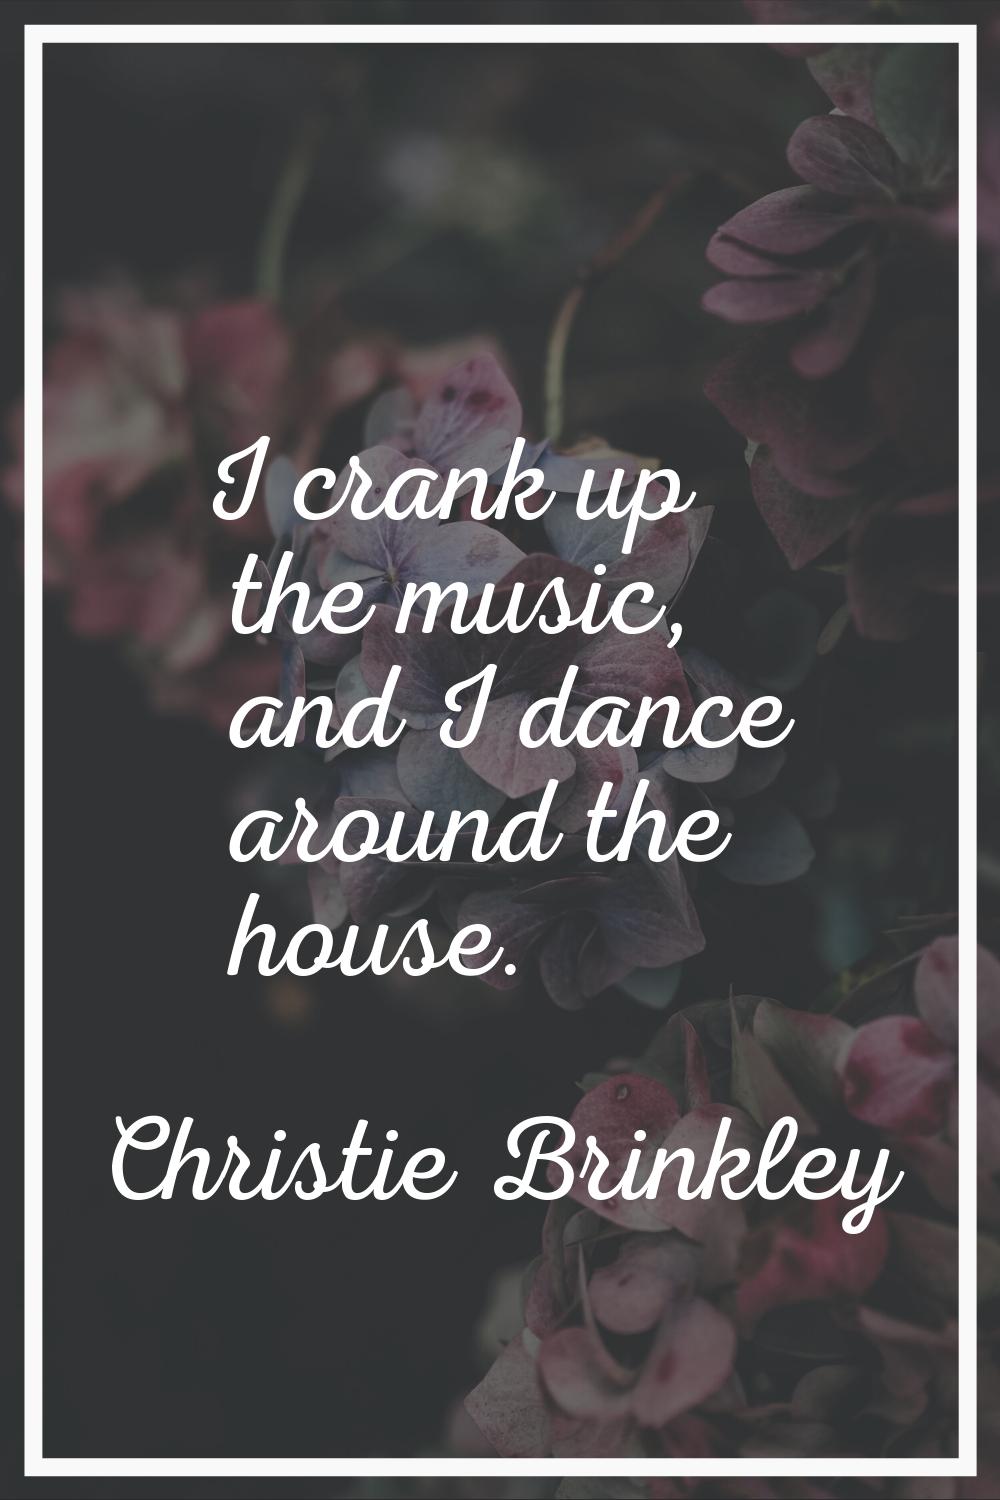 I crank up the music, and I dance around the house.